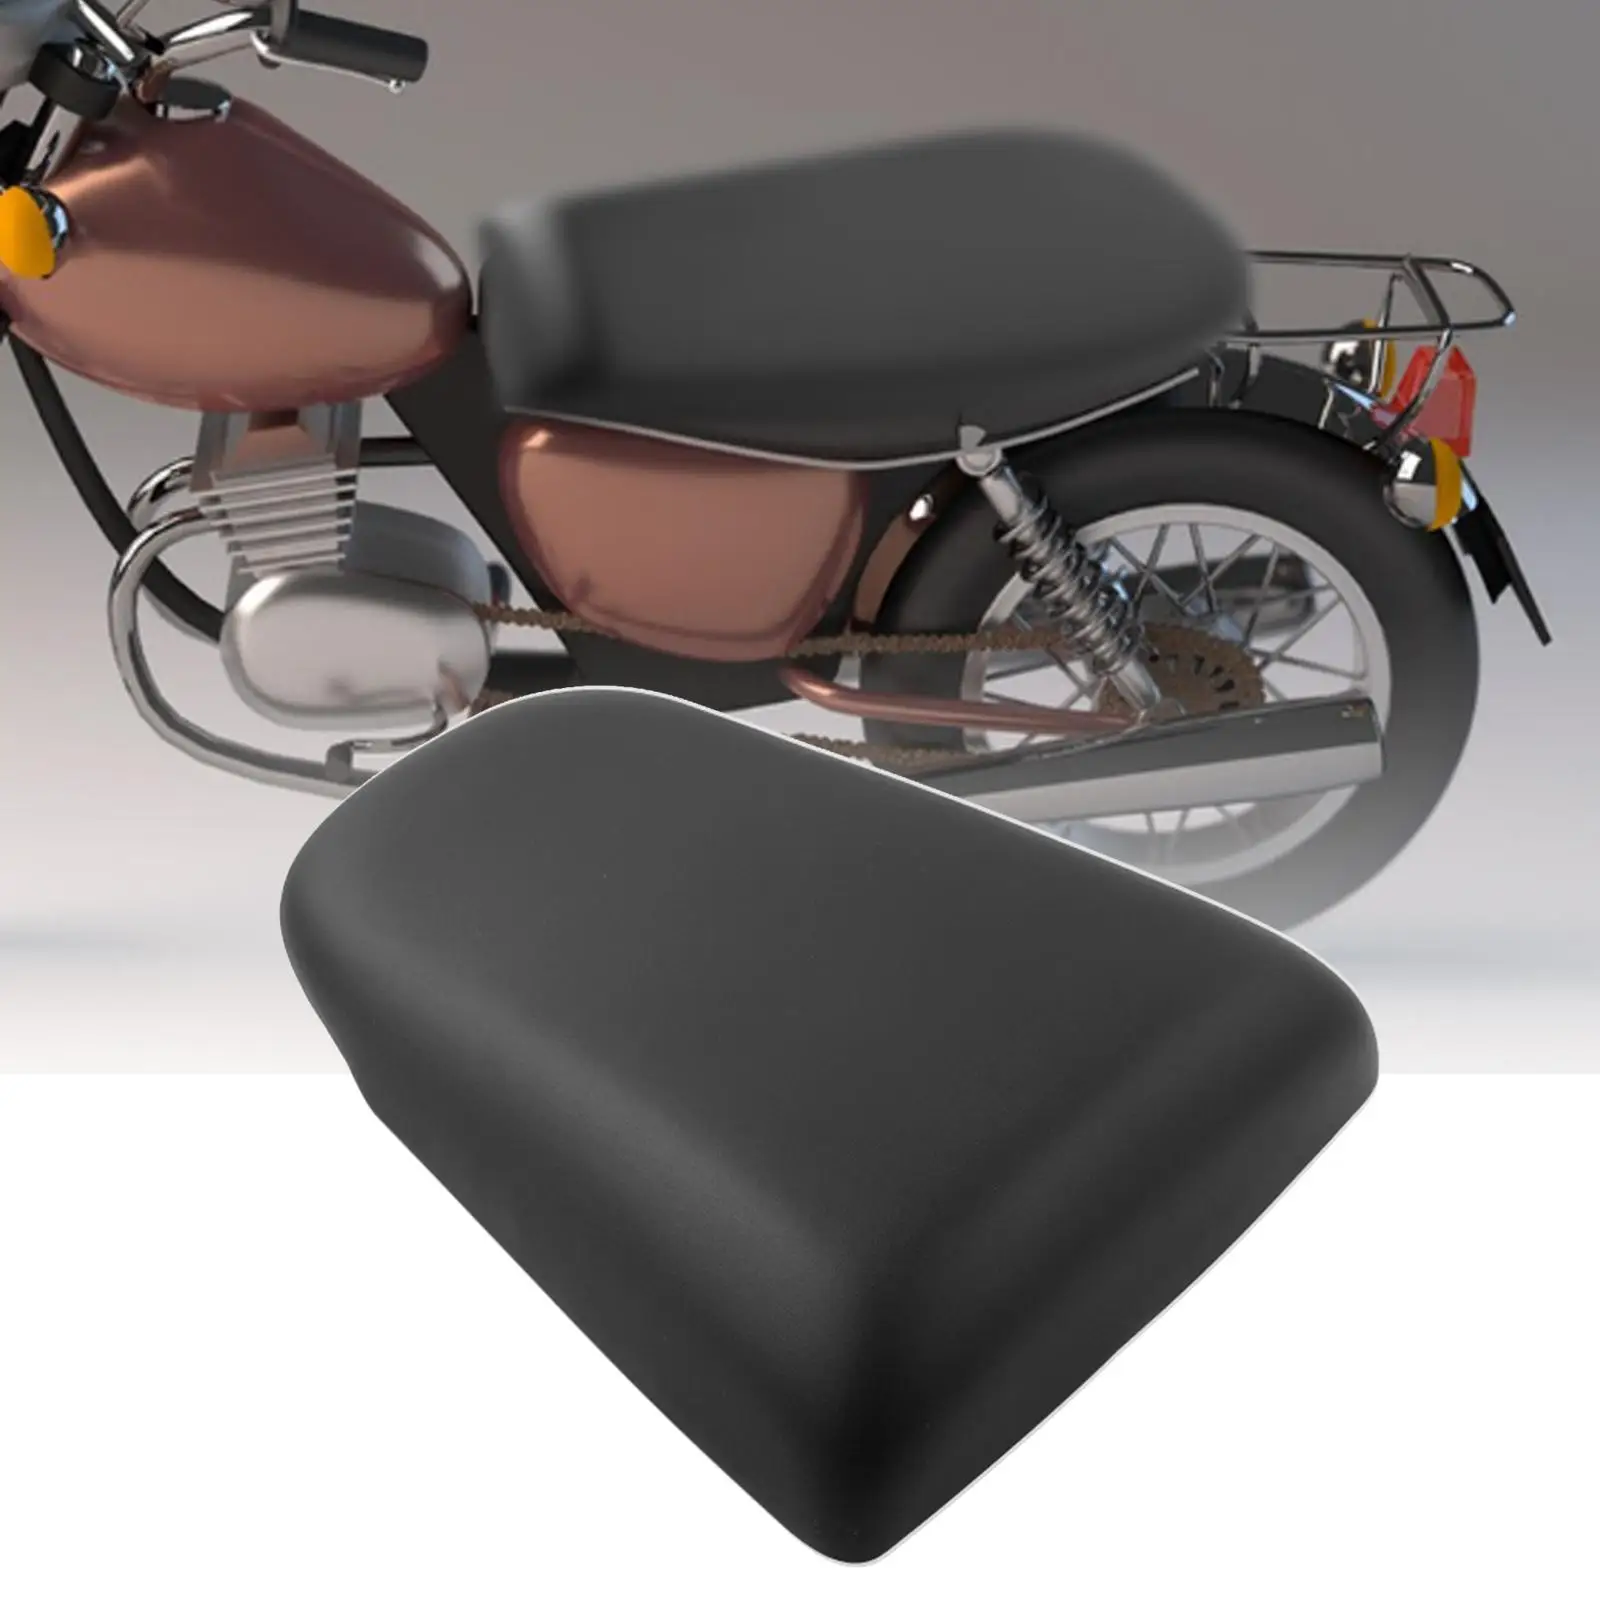 Motorcycle Rear Pillion Passenger Seat Cushion Spare Parts Practical for Suzuki Sv1000 Reusable Easy to Install Sturdy Premium